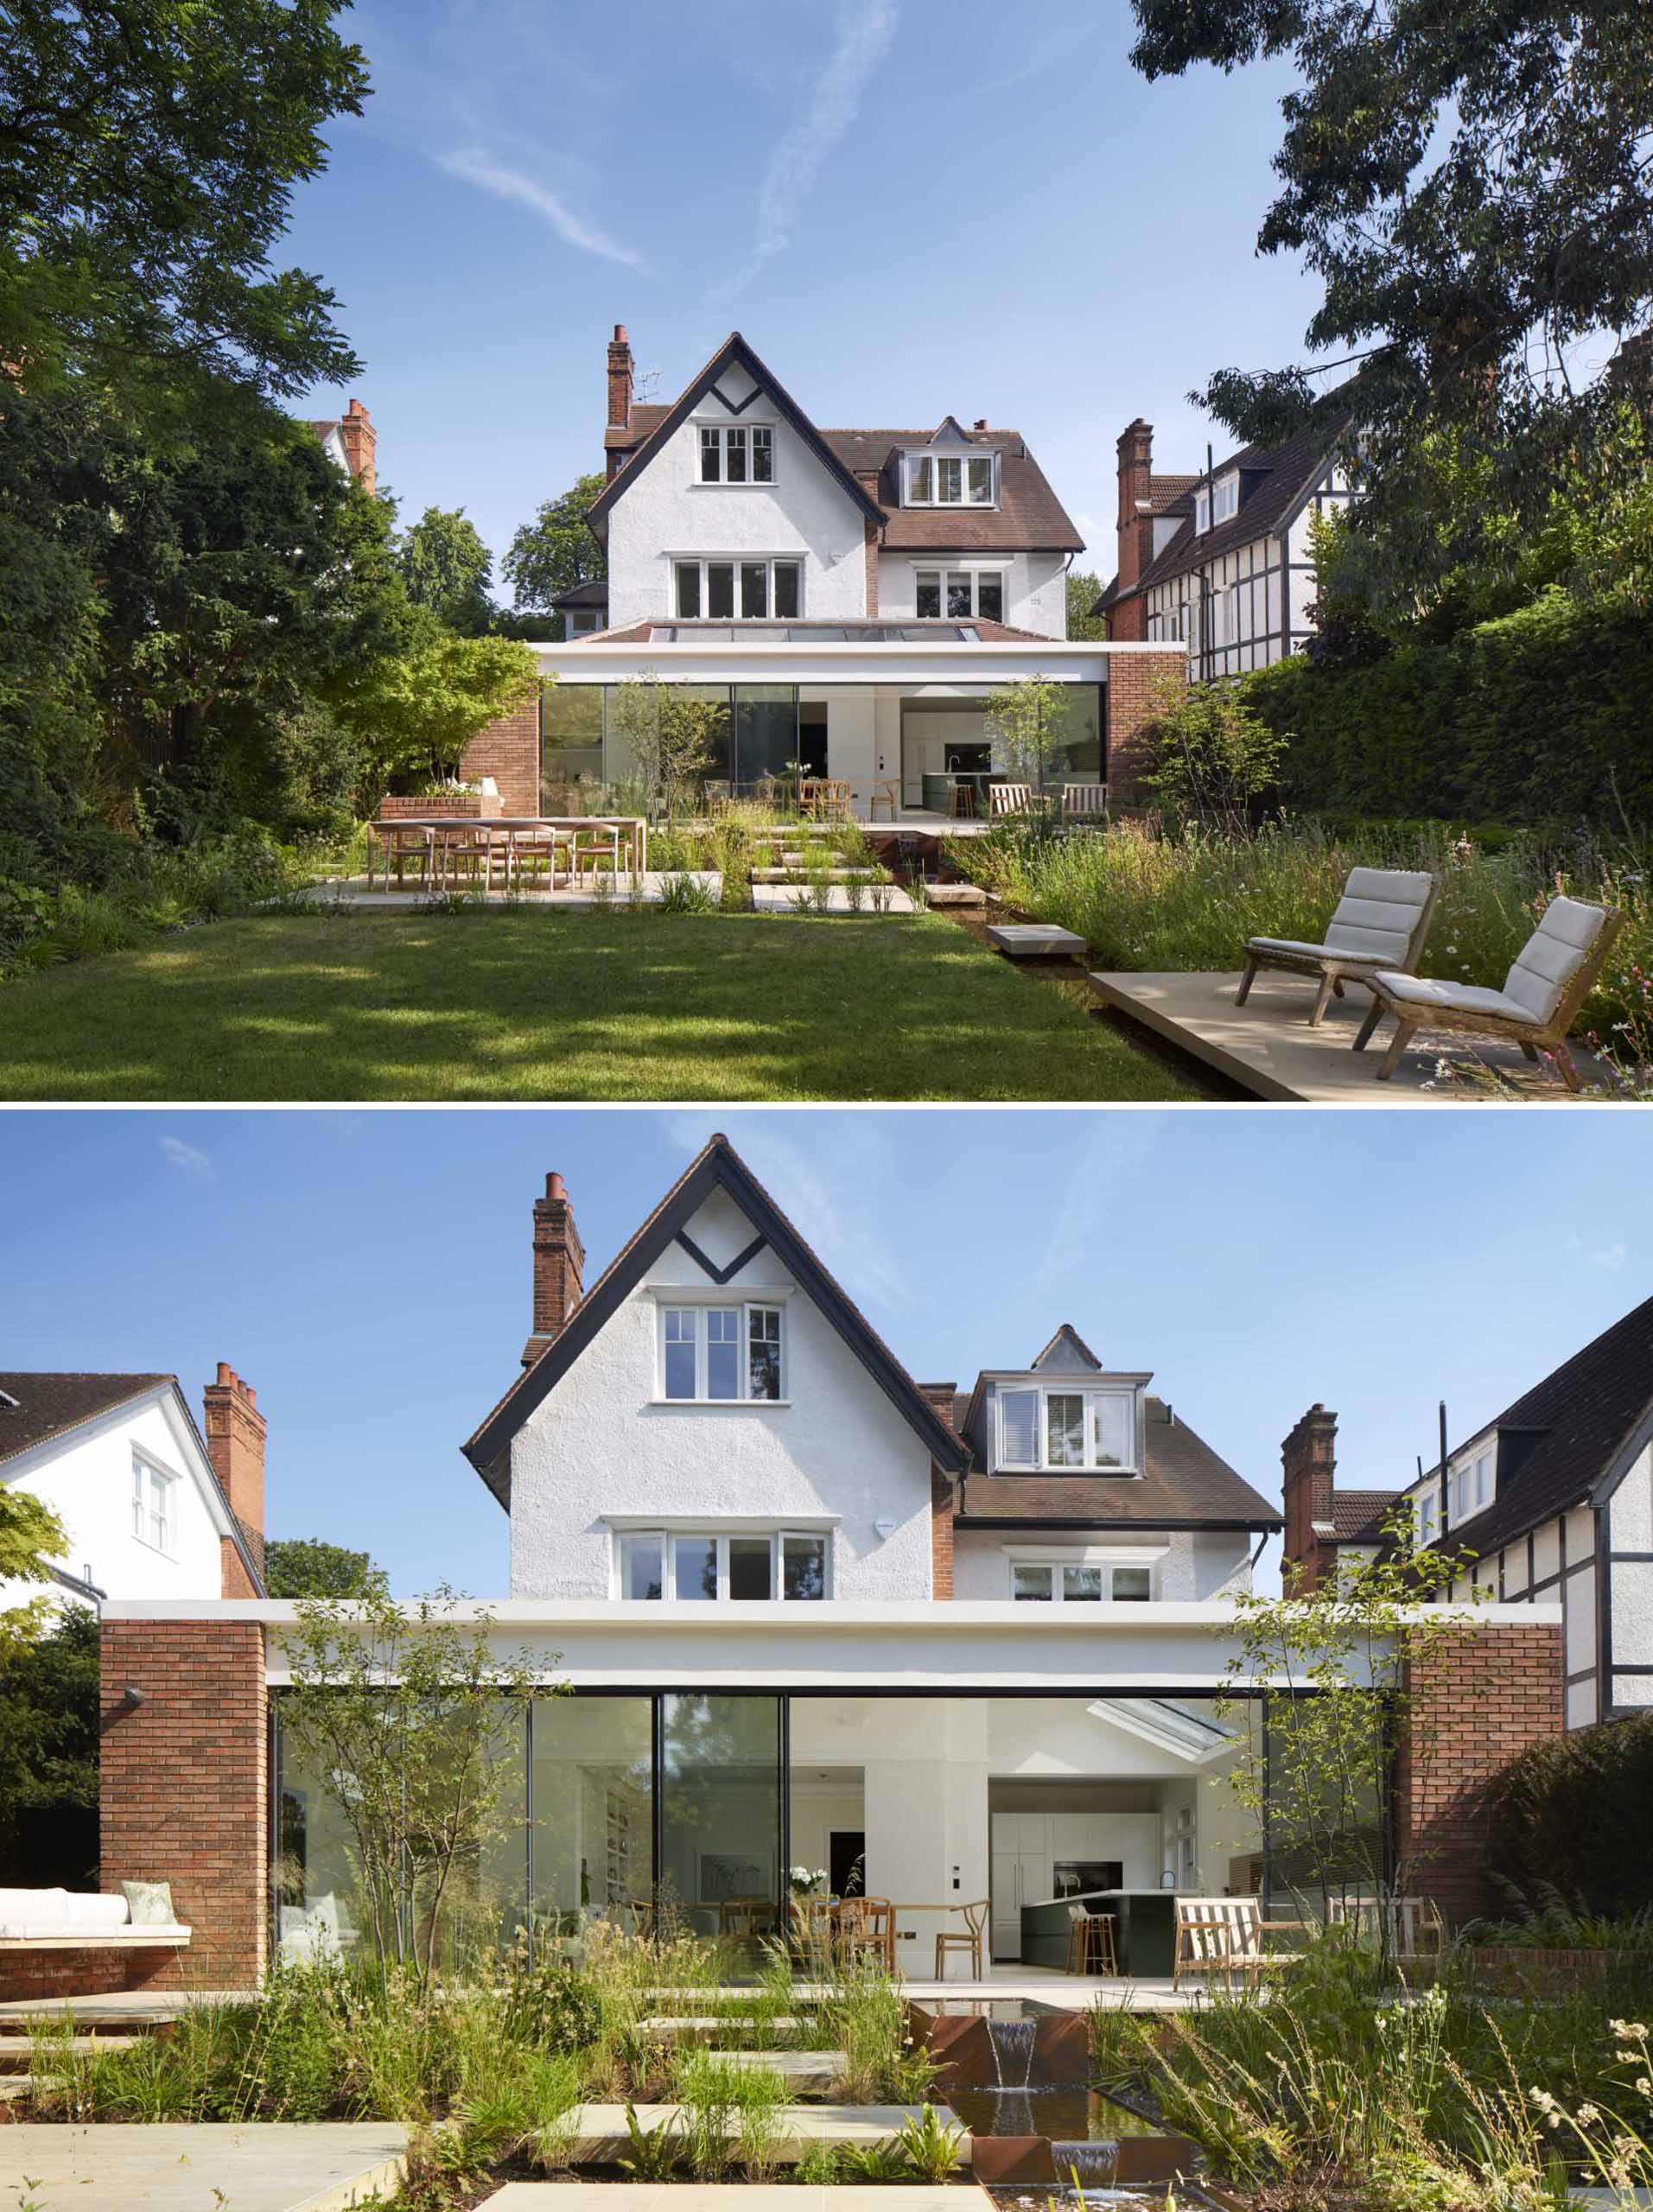 An updated brick extension for an Edwardian home includes a sitting area, dining area, and kitchen.